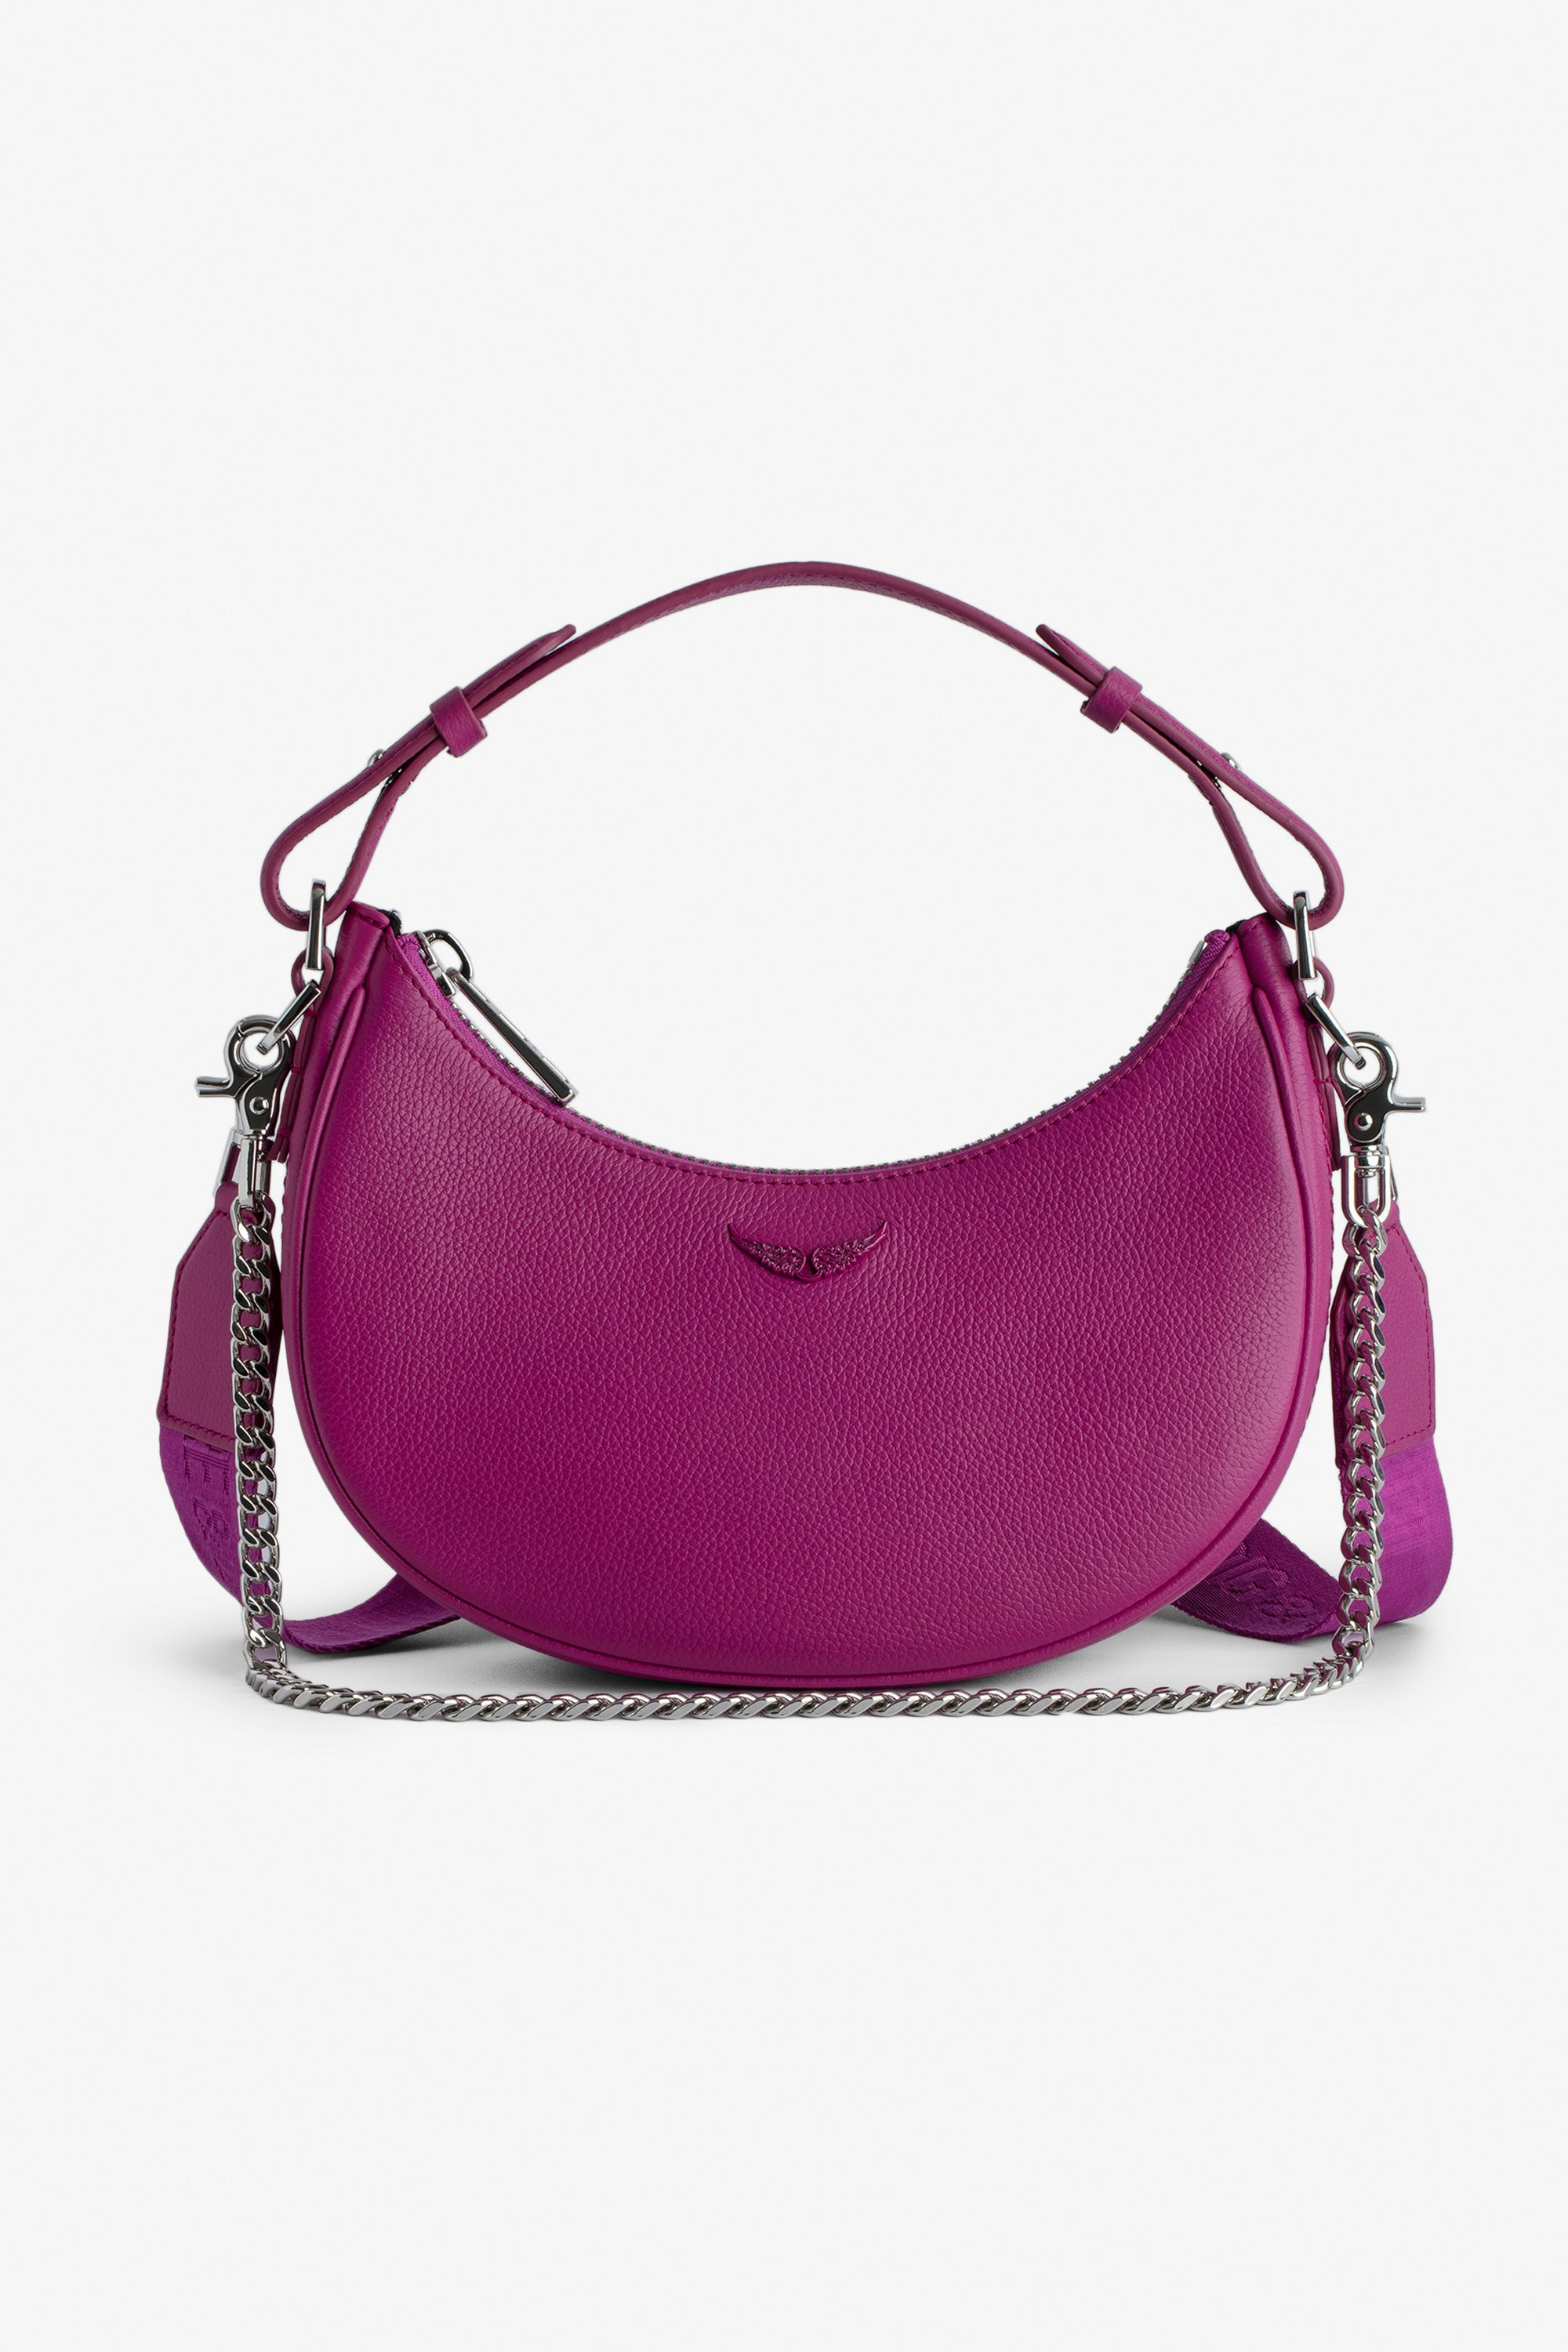 Moonrock Bag - Fuchsia grained leather half-moon bag with handle and chain shoulder strap.